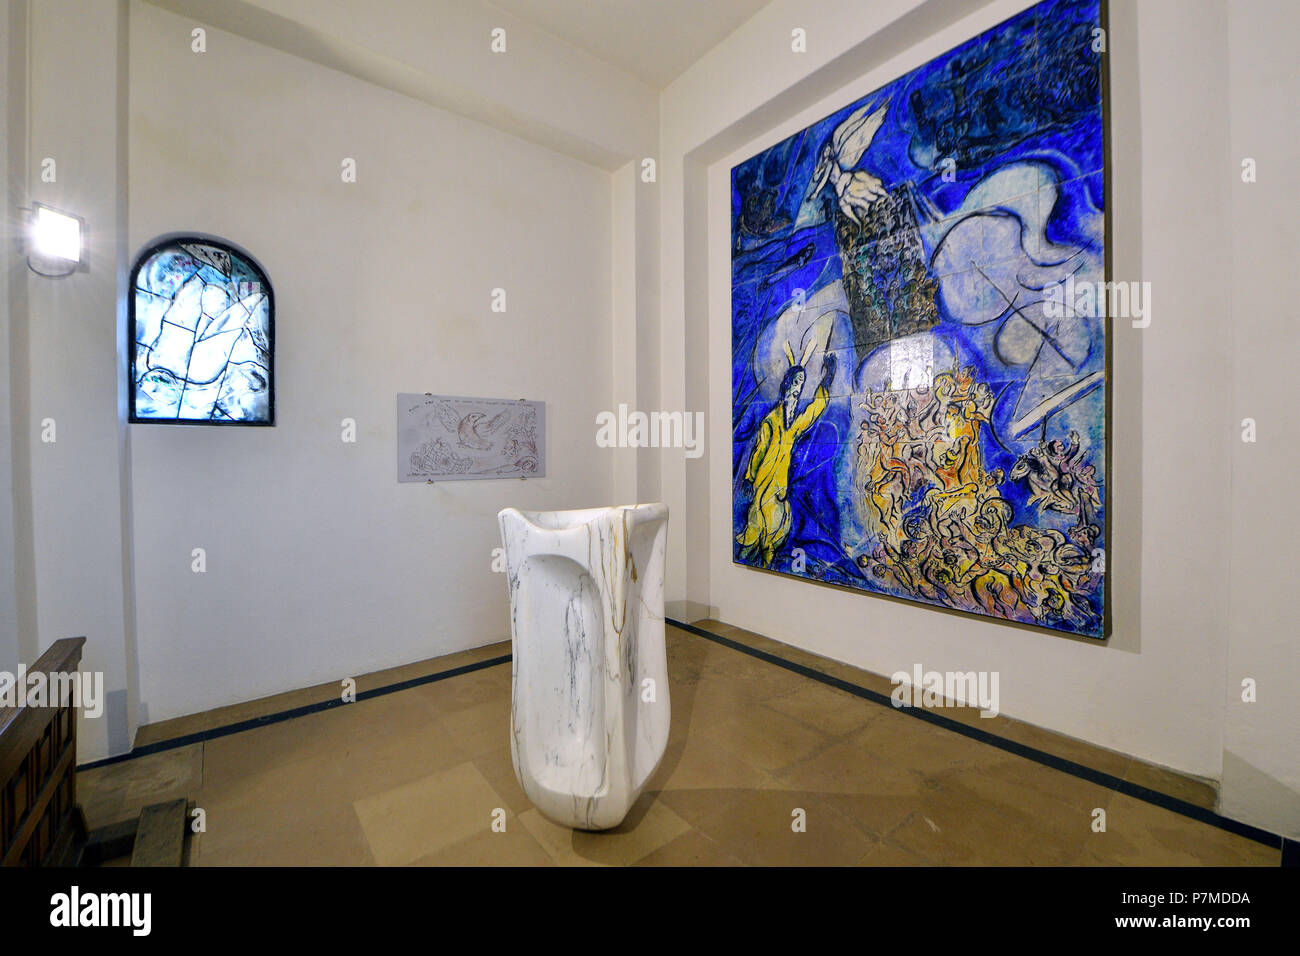 France, Haute Savoie, plateau d'Assy, Passy, Notre Dame de Toute Grace church, Baptistry of Chagall, ceramics Red Sea crossing of Marc Chagall, In front of the mosaic, baptismal tank of Carlo Sergio Signori in Carrara marble Stock Photo